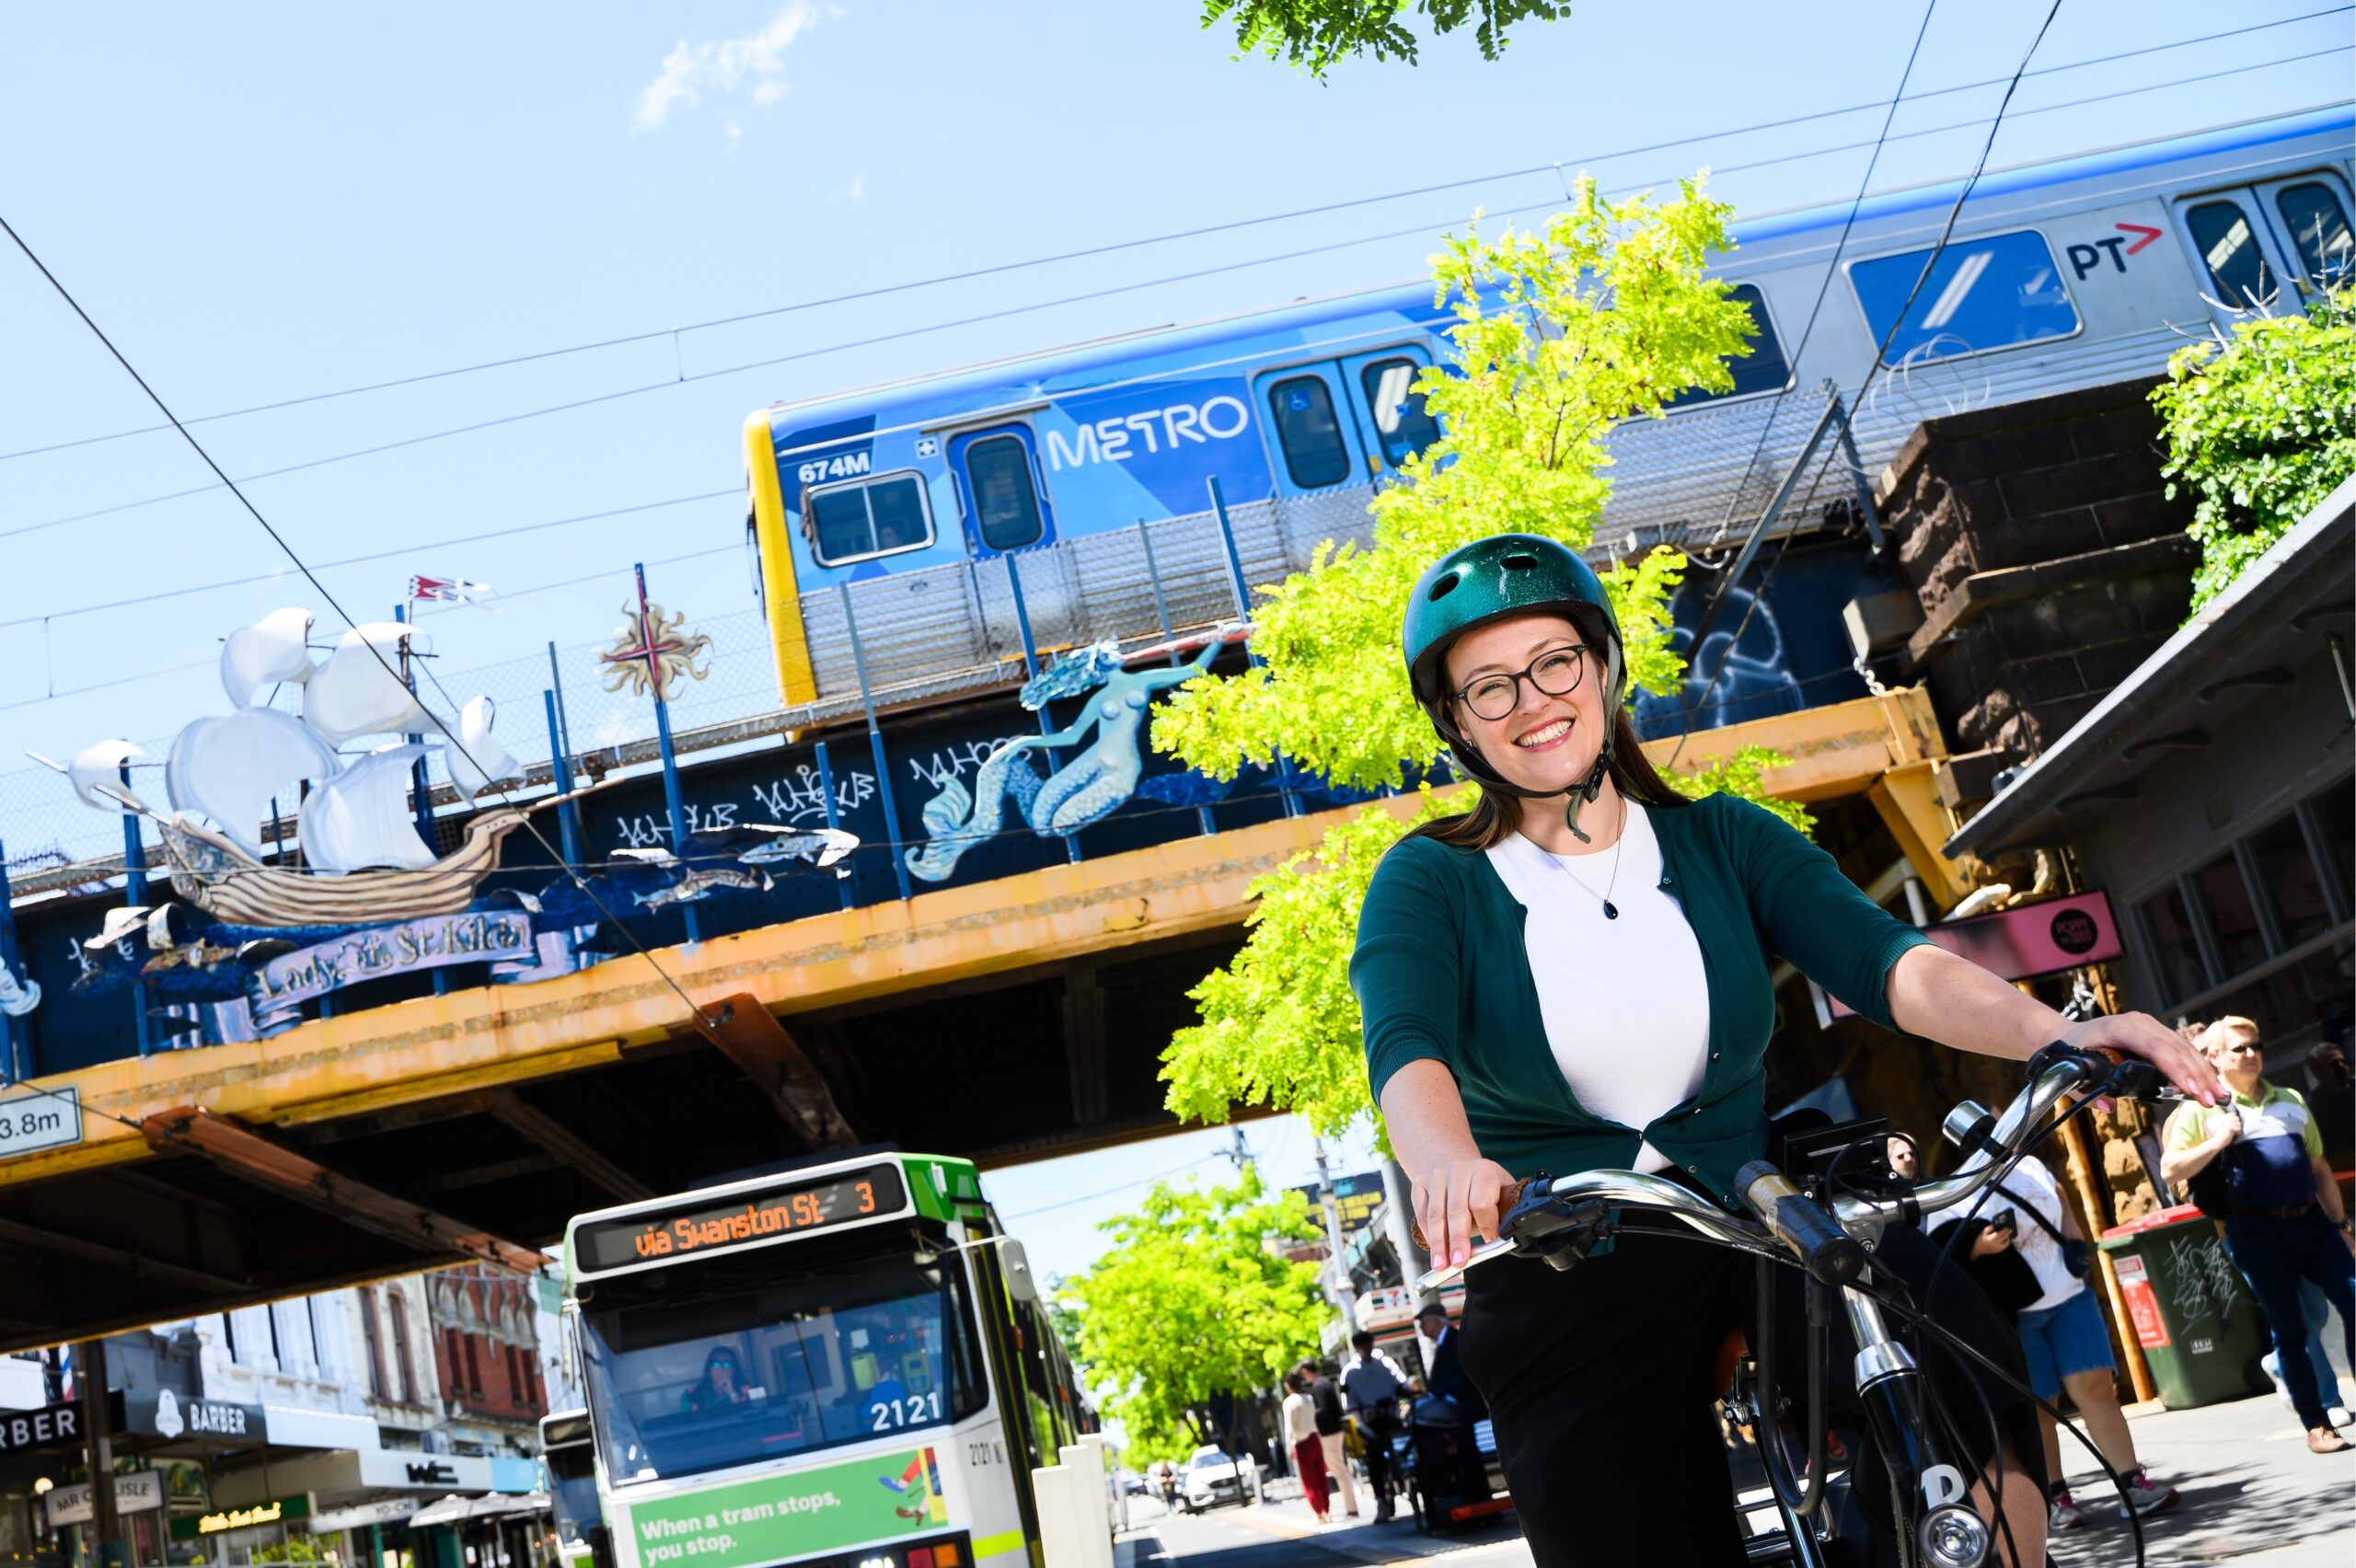 Katherine Copsey MLC sitting on a bike in a protected bike lane, with a tram at a stop behind her, while a train crosses a bridge overhead